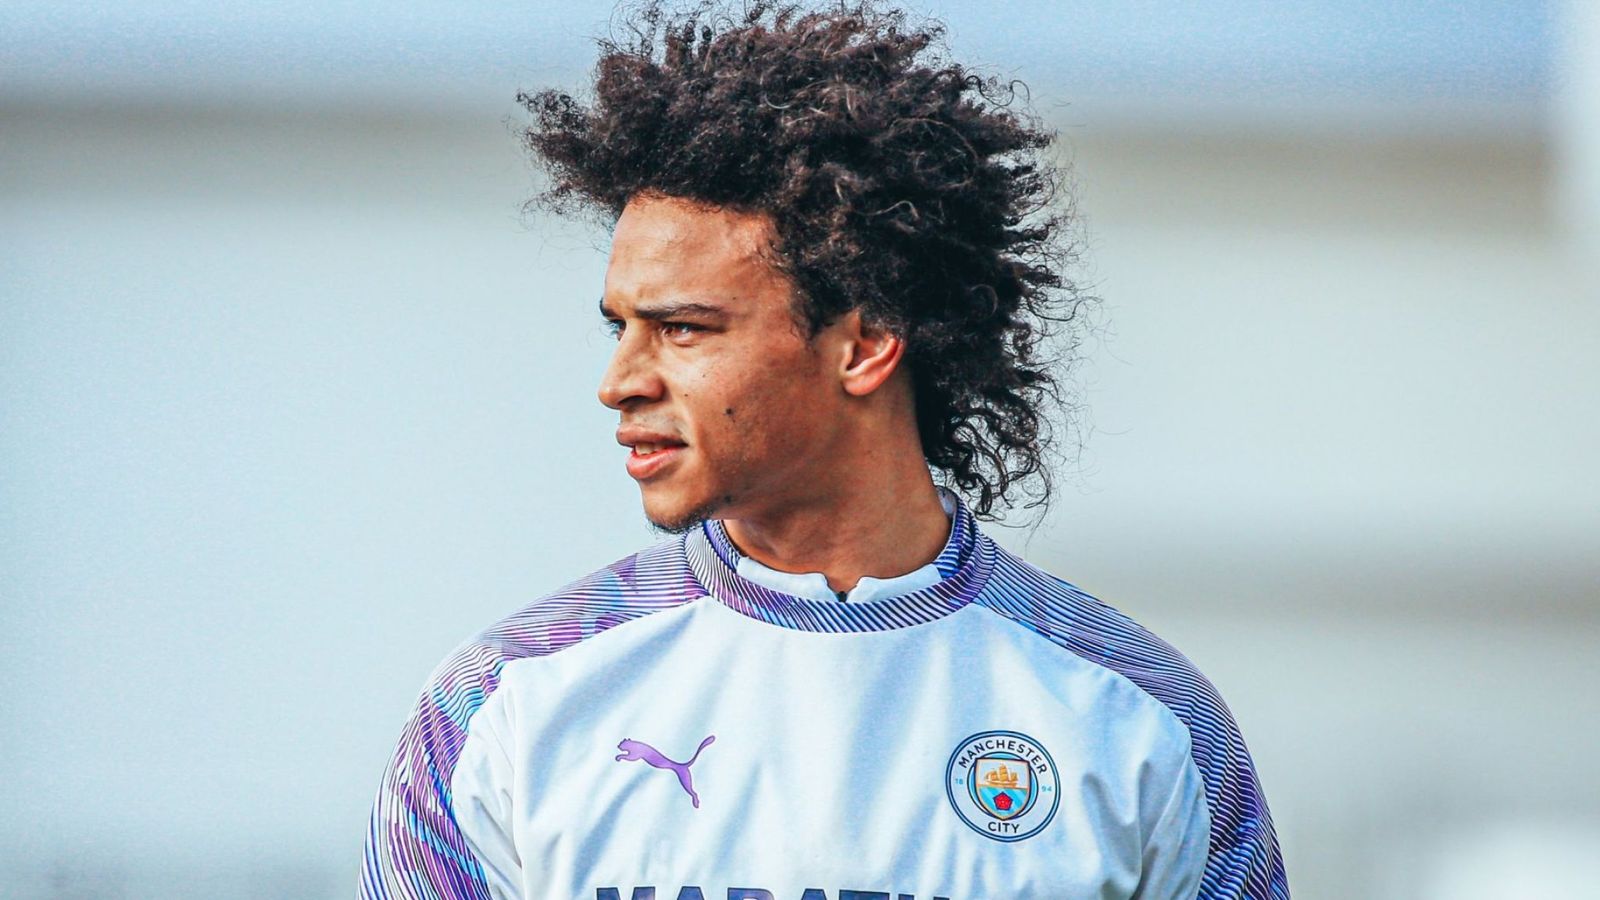 Leroy Sane Has Not Played For Manchester City Since - Leroy Sane Back To Training - HD Wallpaper 